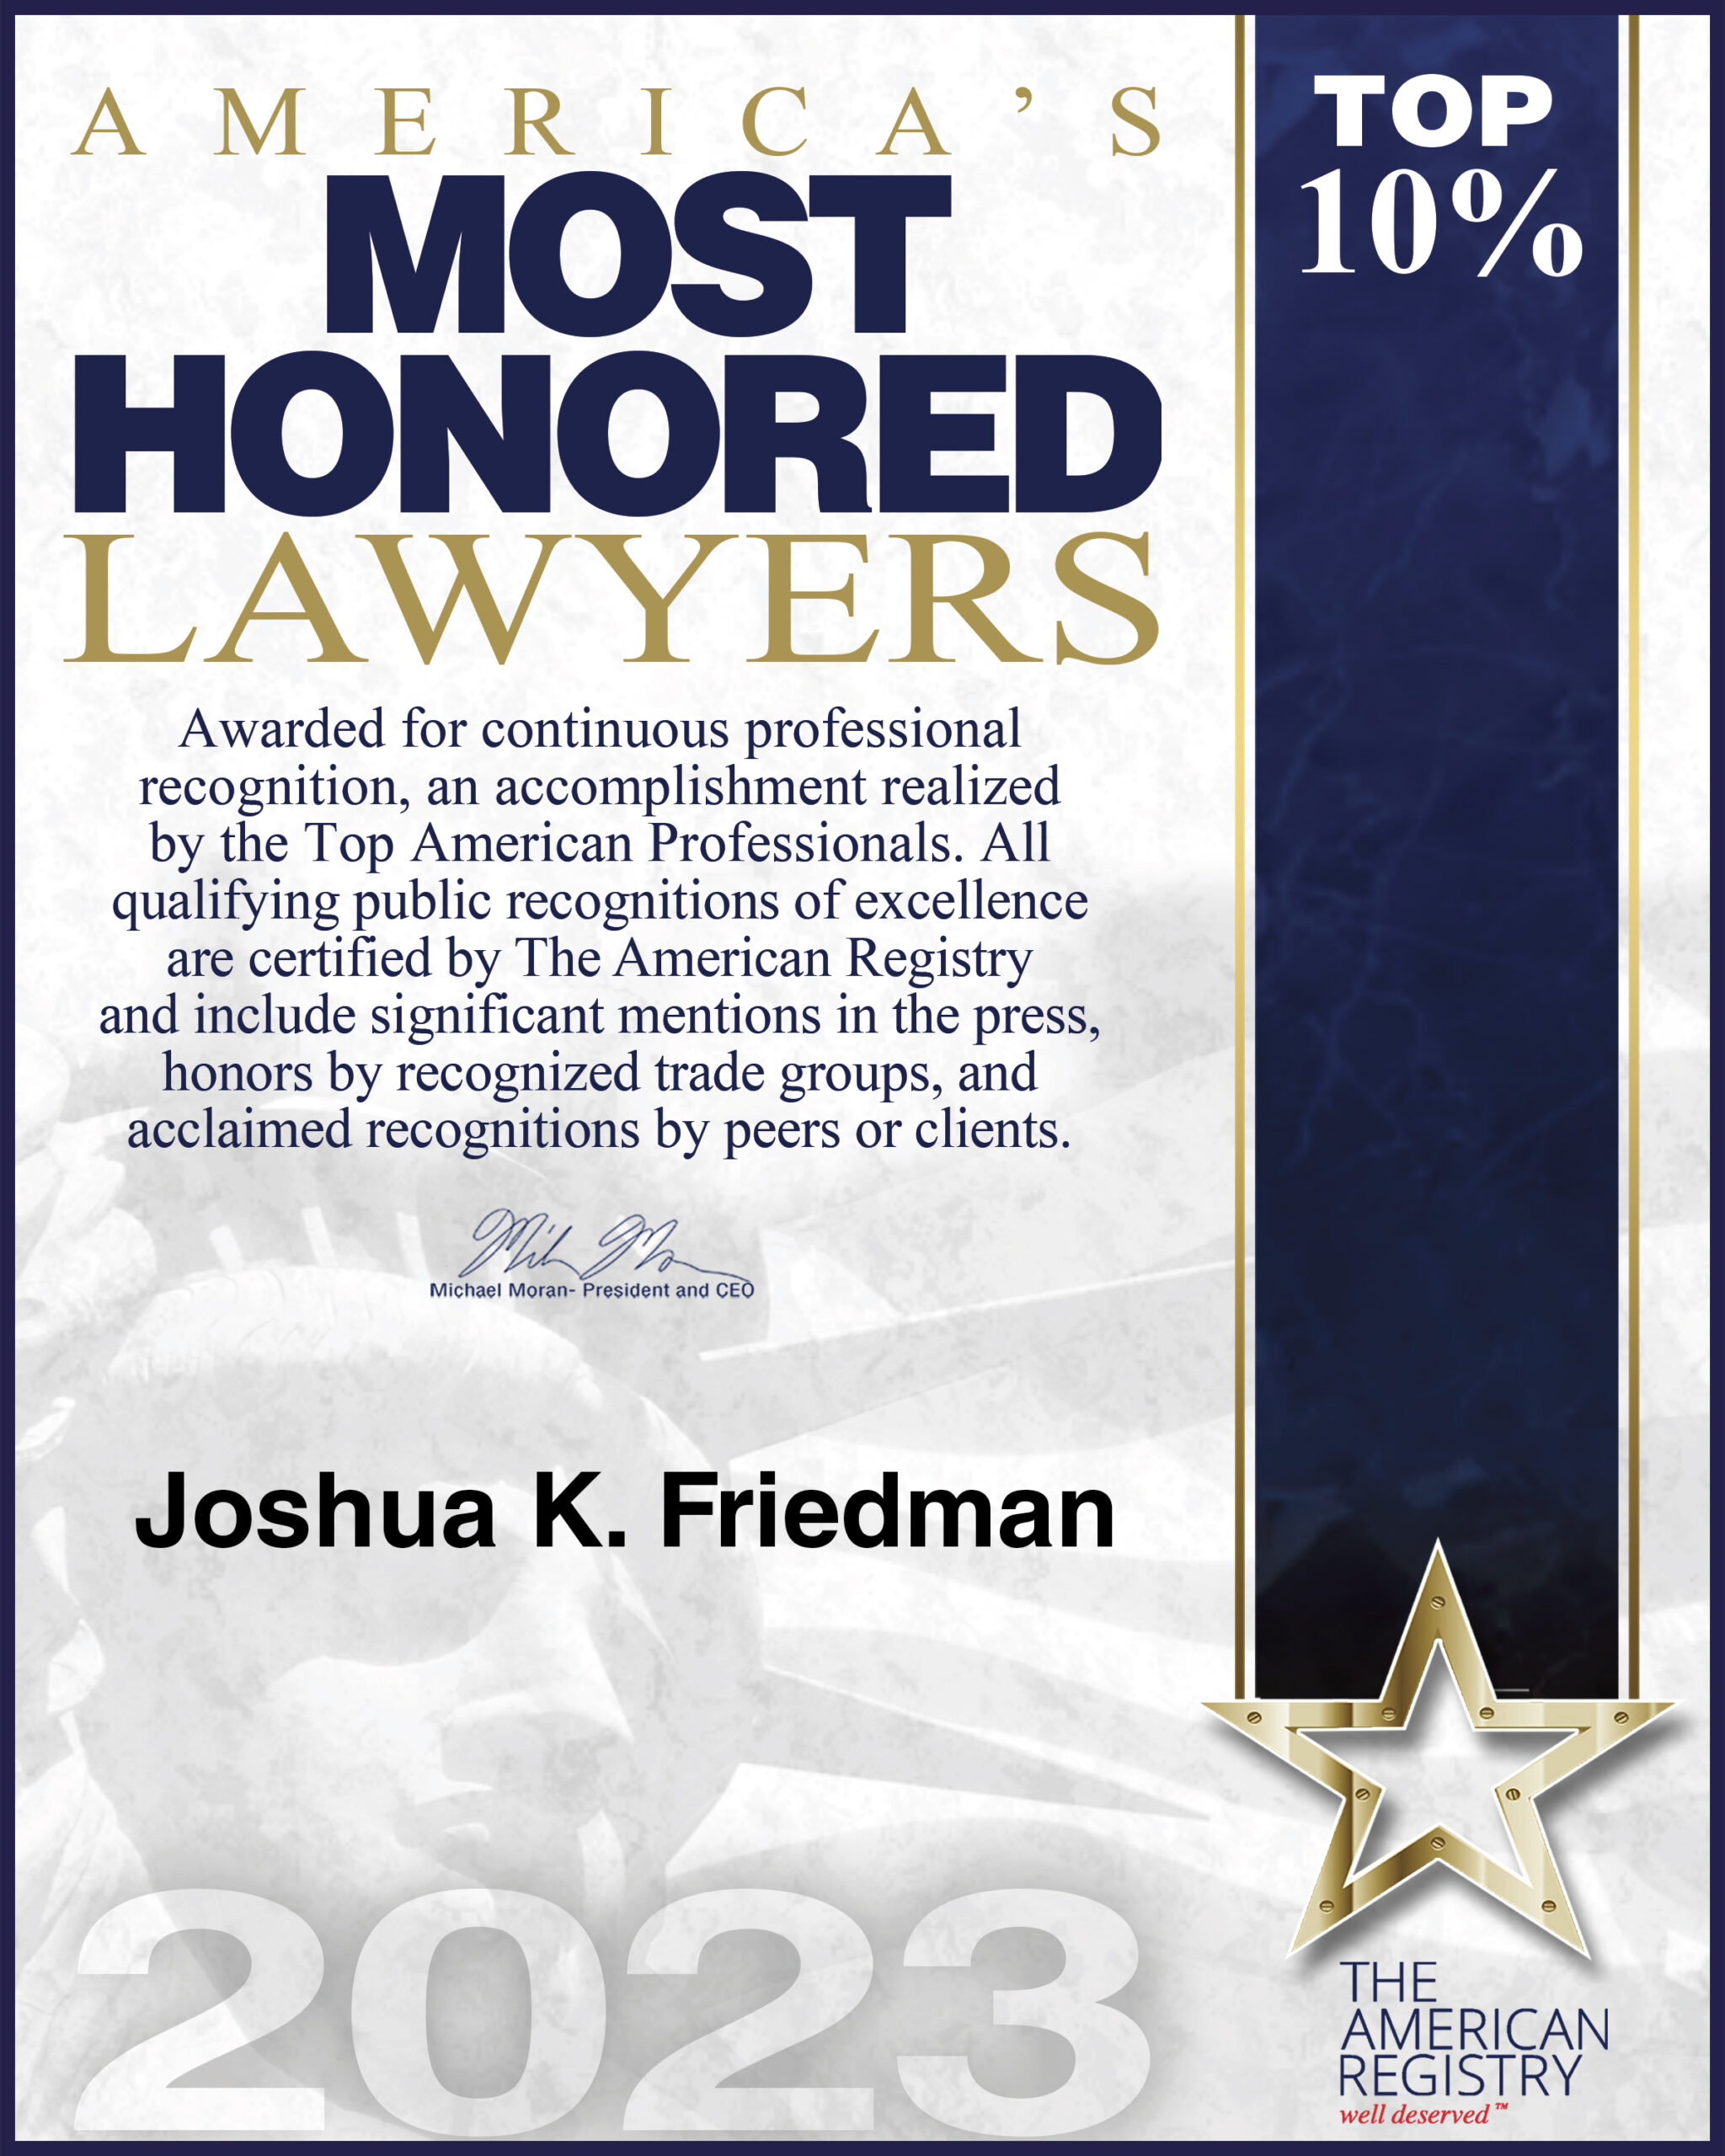 Board Certified Family Law Attorney Joshua Friedman Awarded “America’s Most Honored Lawyers” in 2023